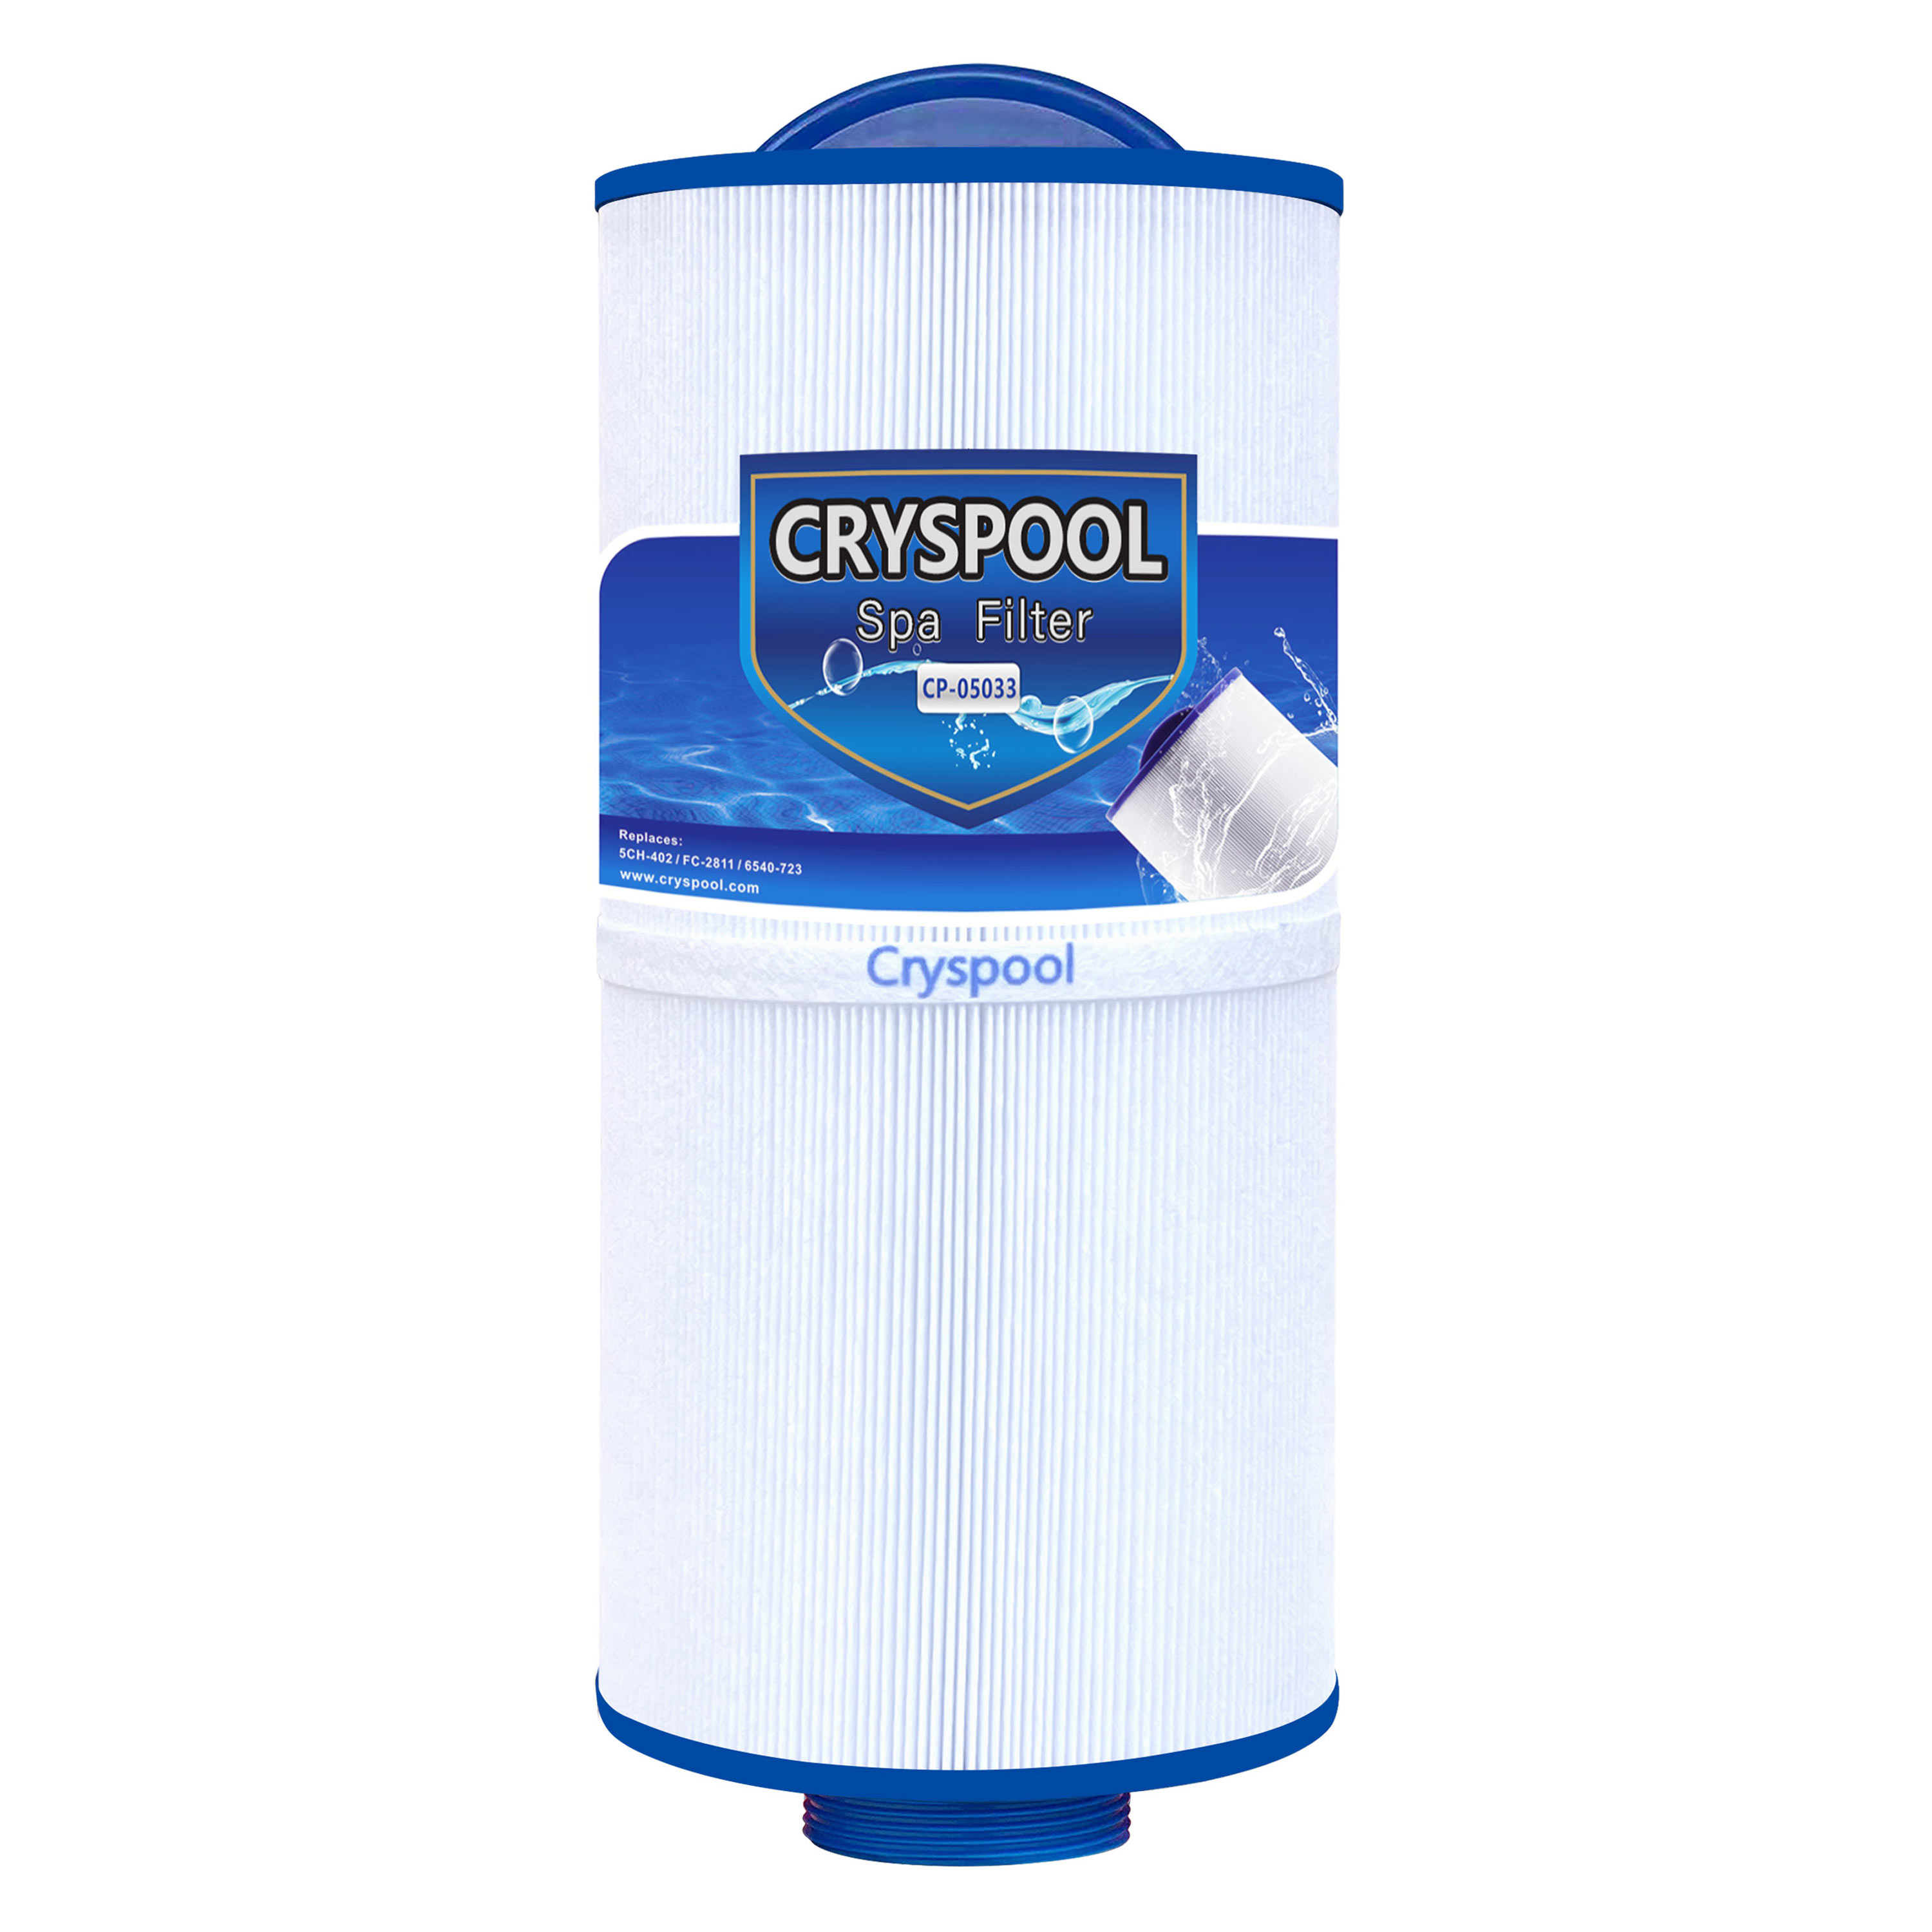 Manufacturing Companies for Hot Tub Filter No Suction - Cryspool 2″ MPT-Thread Spa Filter Compatible with Tuff spa Filter, Del Sol Spas, Sundance Spas 6540-723,5CH-402, FC-2811, South Pacifi...